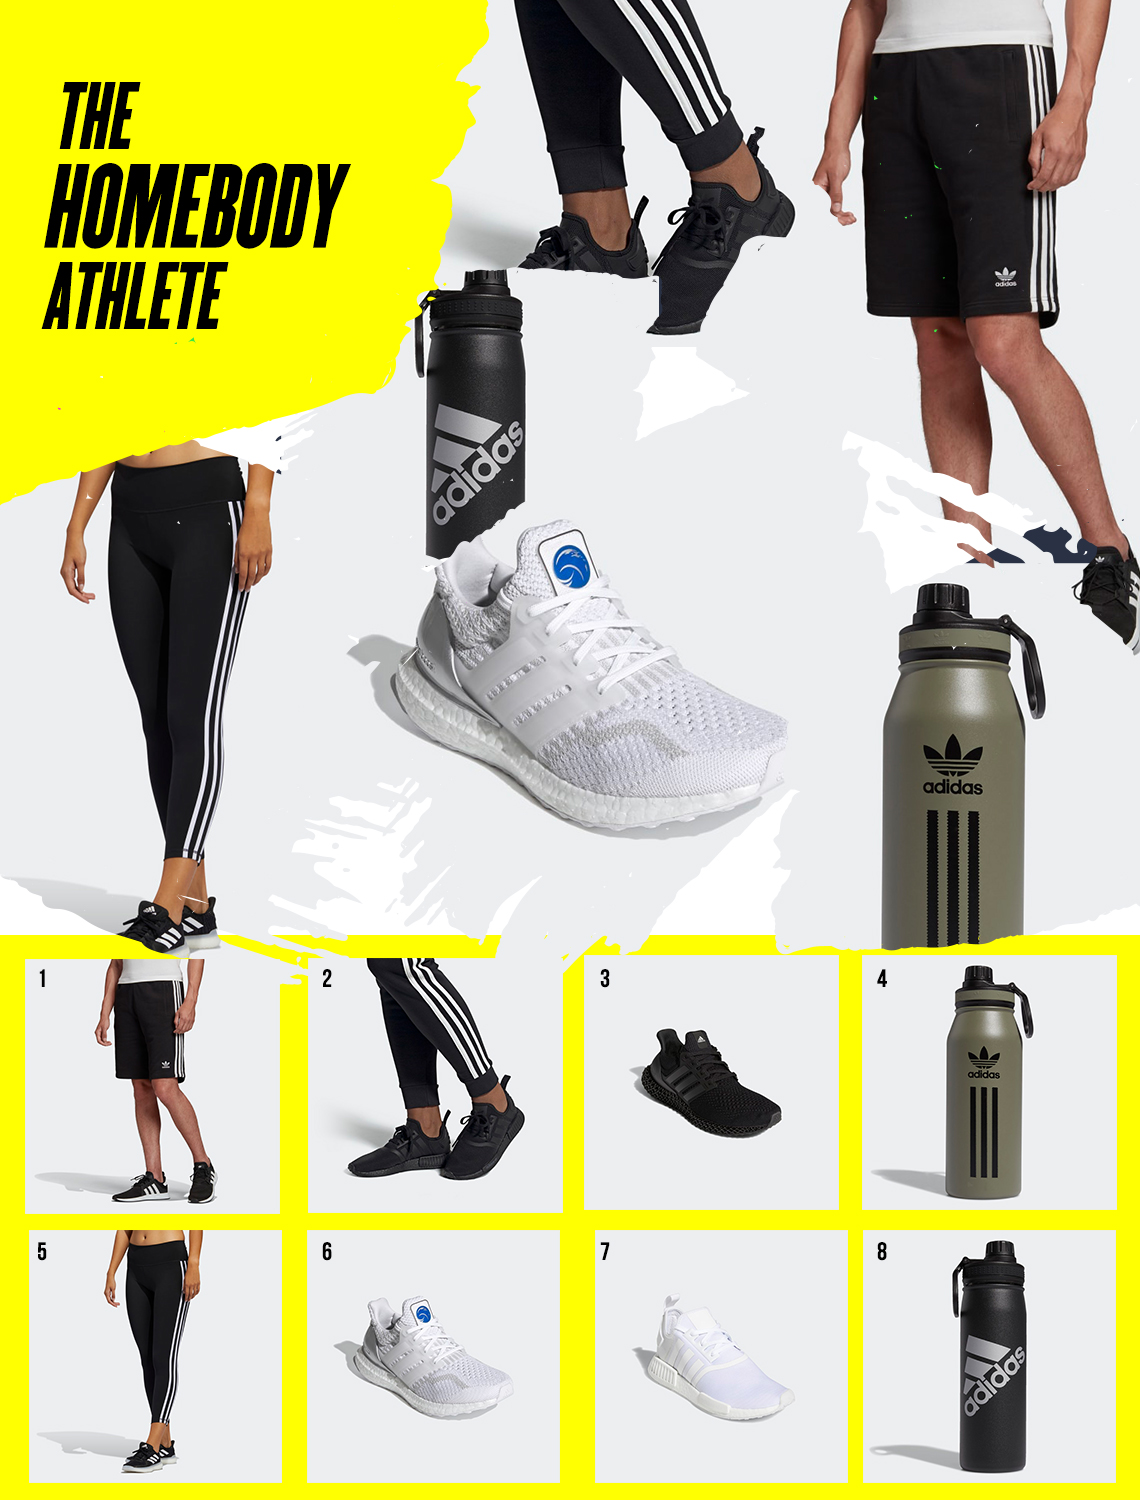 Adidas Holiday Gift Guide Athlete